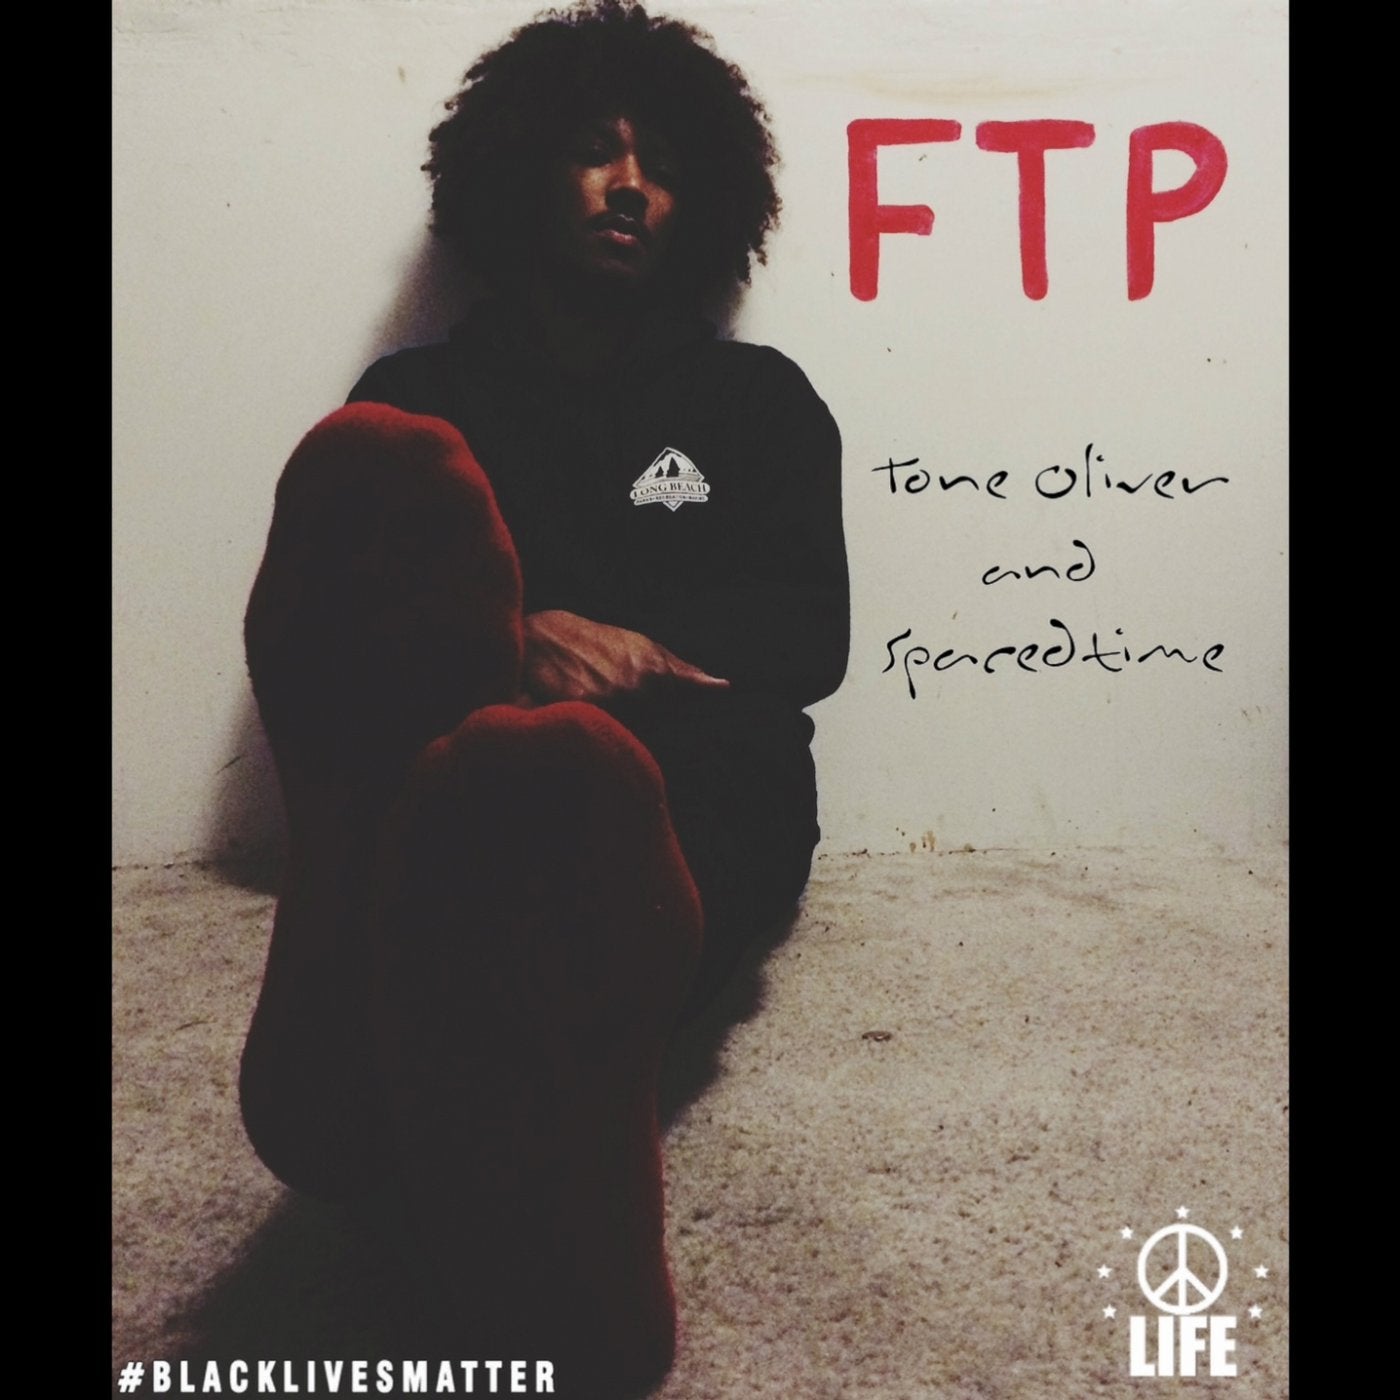 FTP - EP